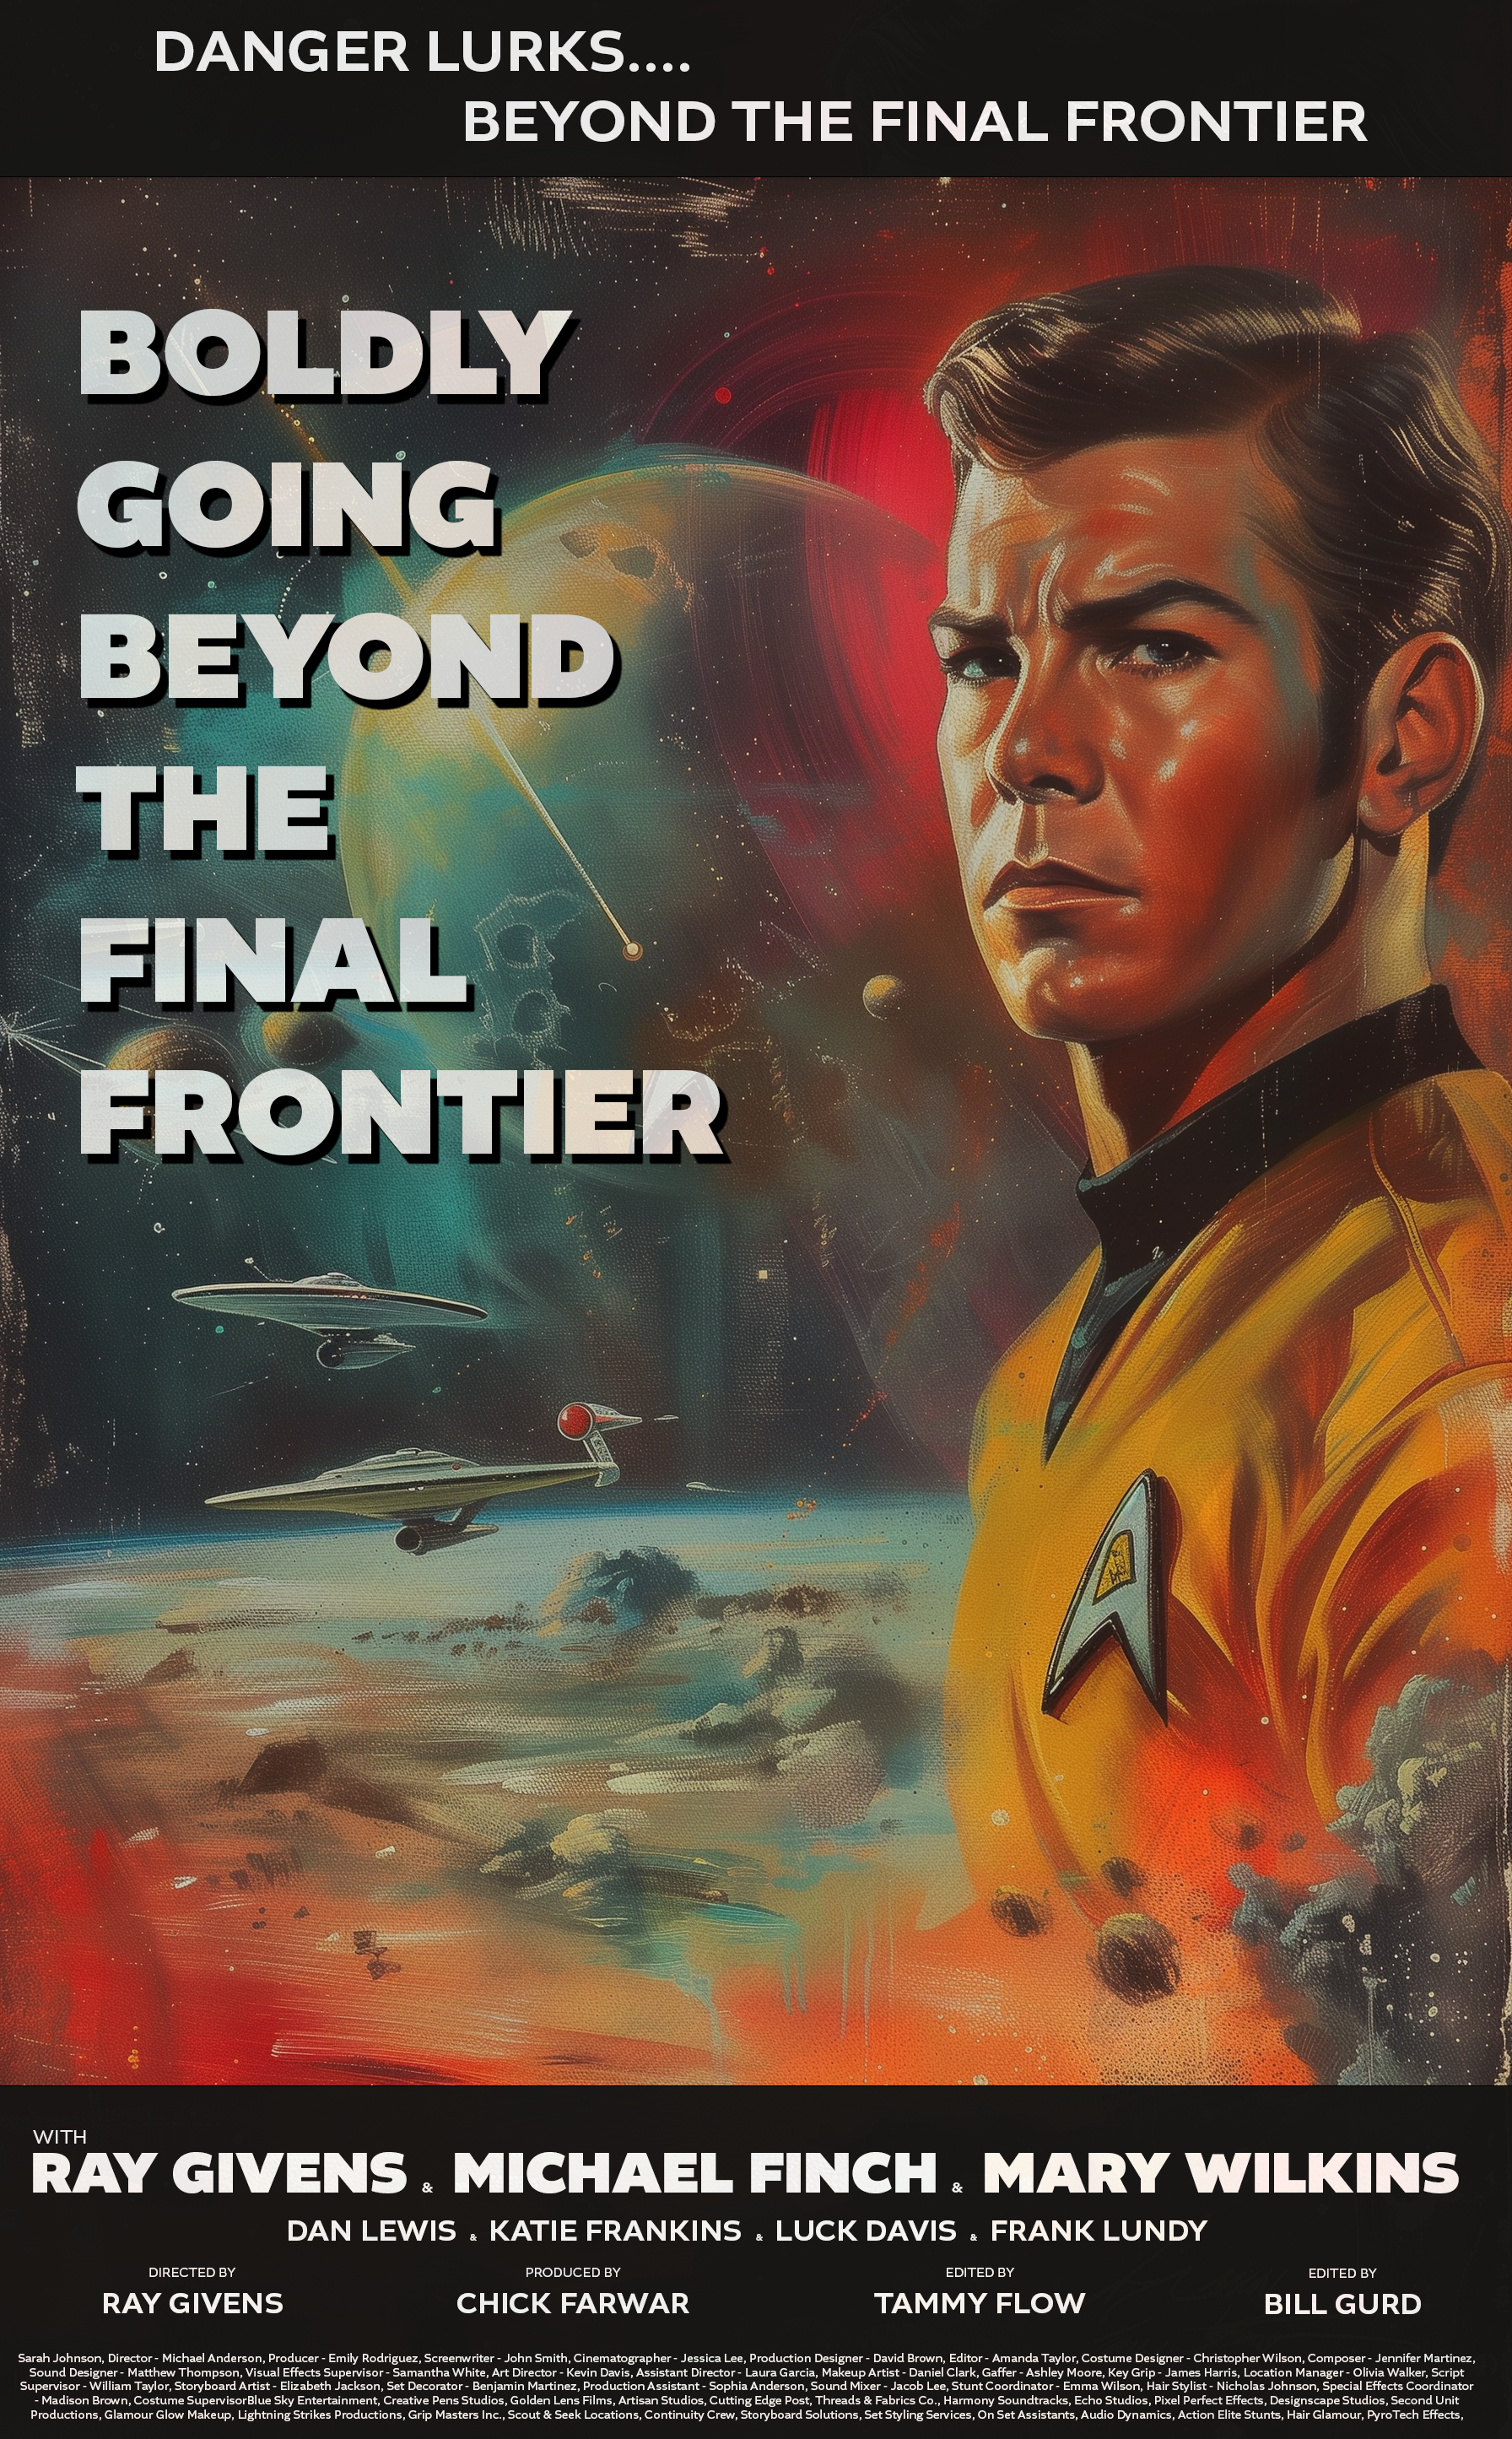 Name:  Beyond the Final Frontier.png
Views: 207
Size:  8.19 MB